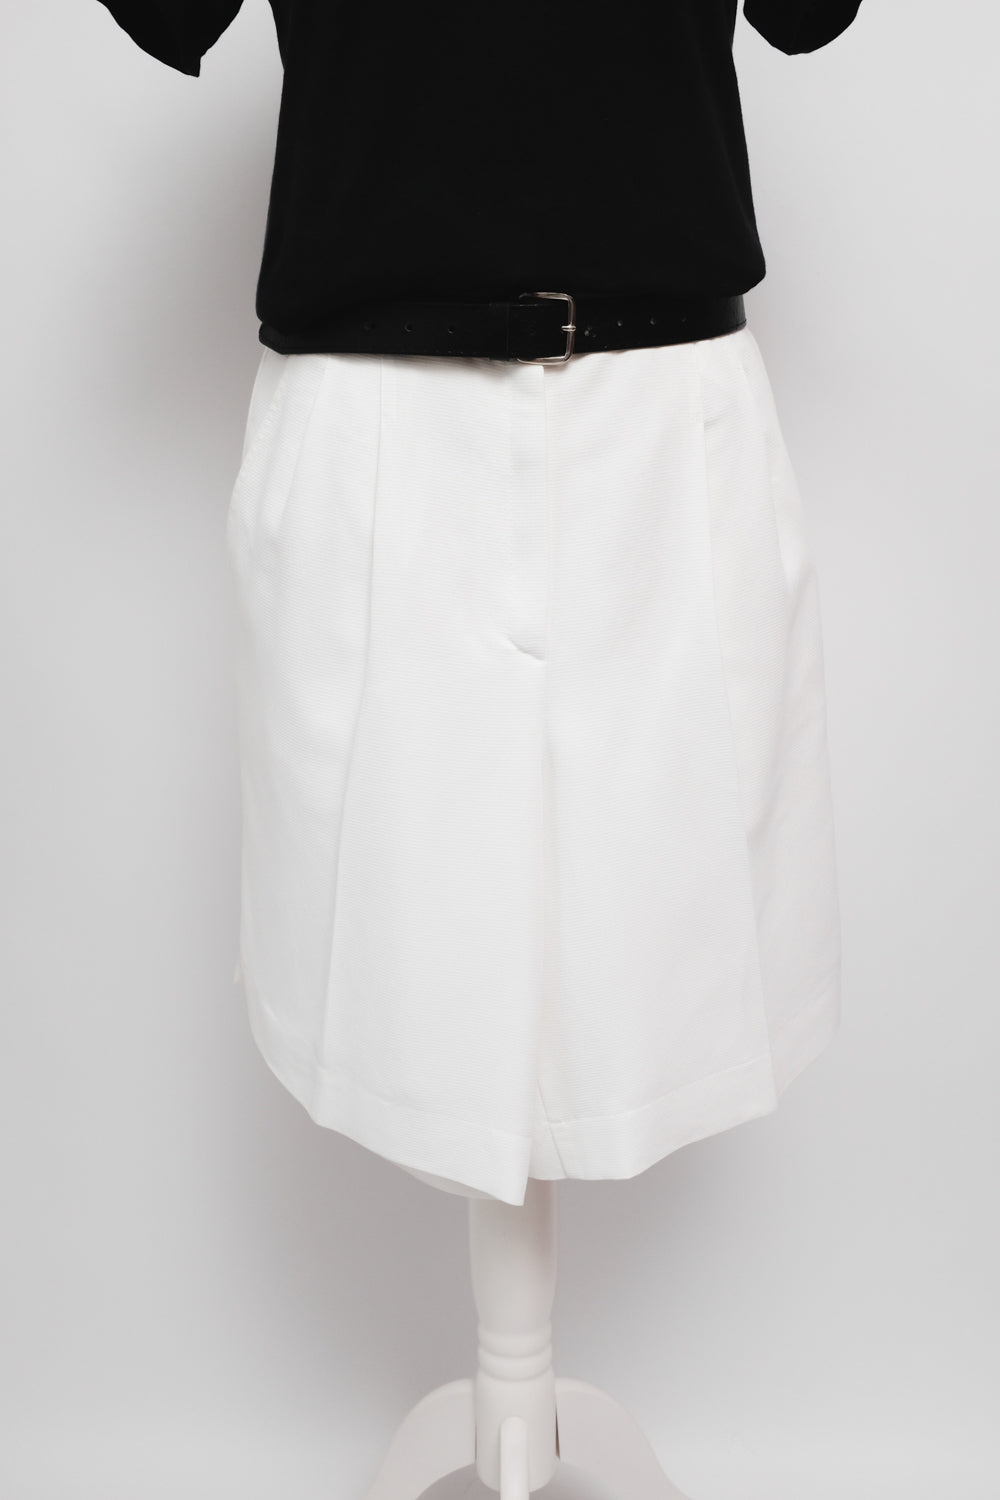 PLEATED WHITE CLASSY VINTAGE SHORTS